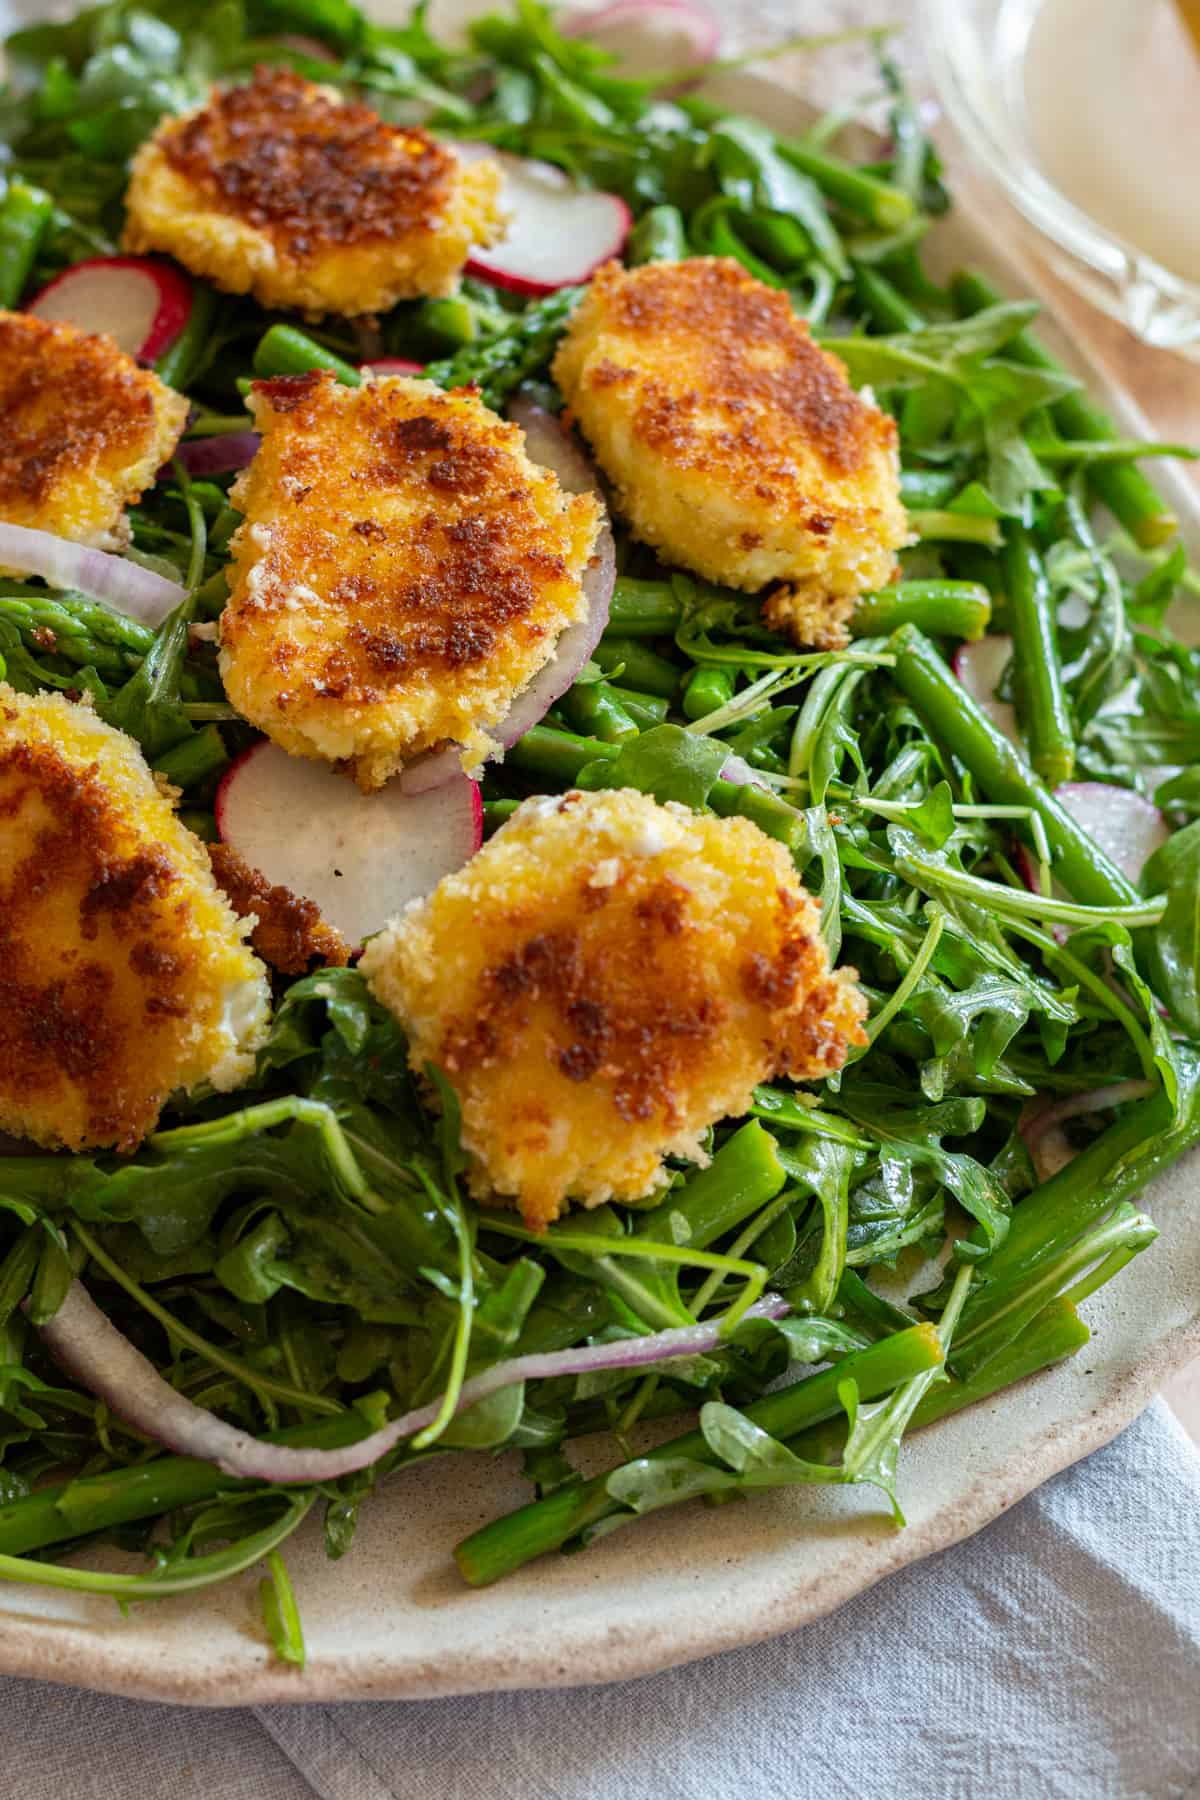 Up close image of the Arugula and Asparagus Salad with fried panko goat cheese rounds.